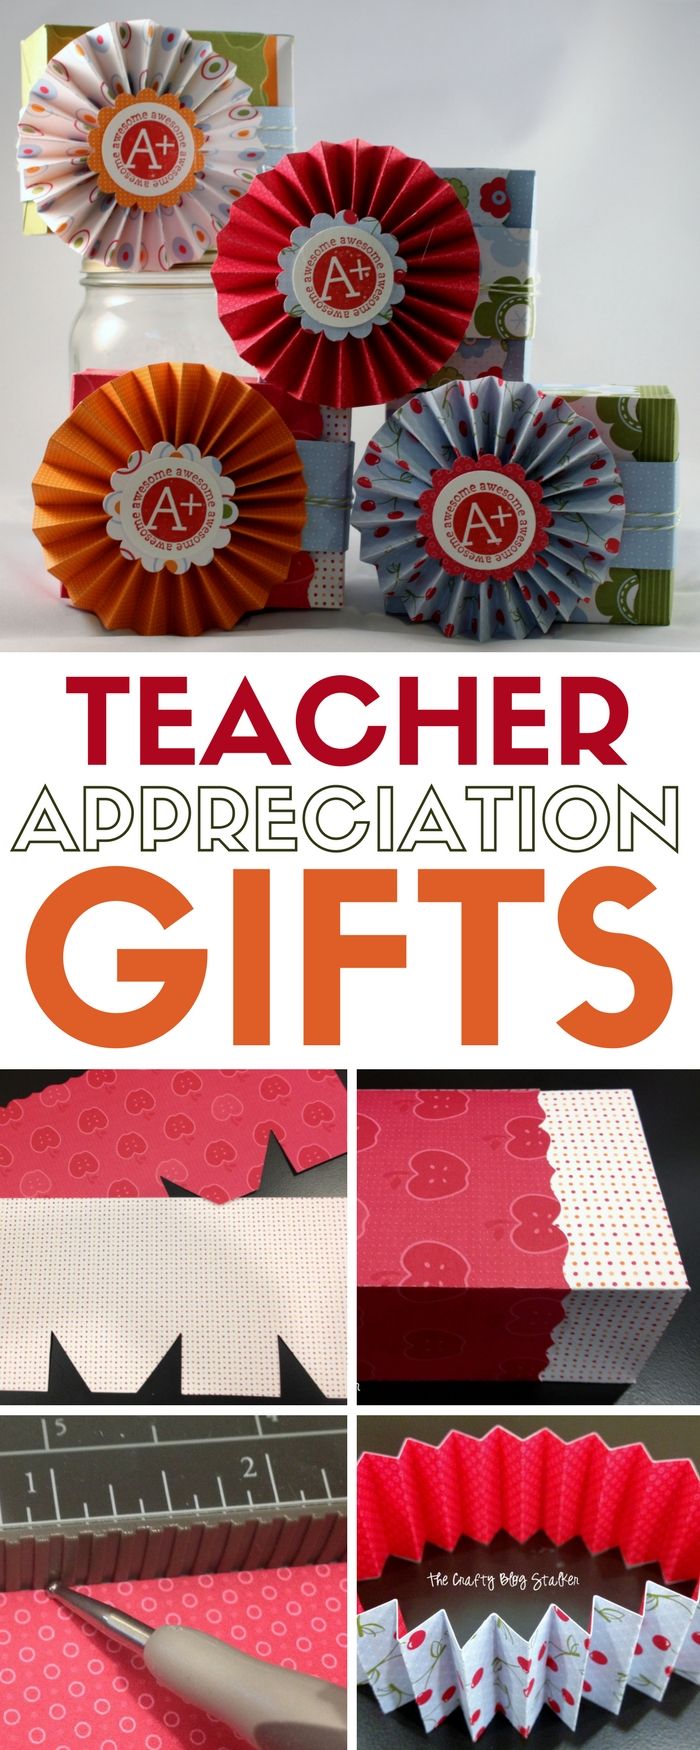 These Teacher Appreciation Gift Boxes are an easy craft to make for those teache...